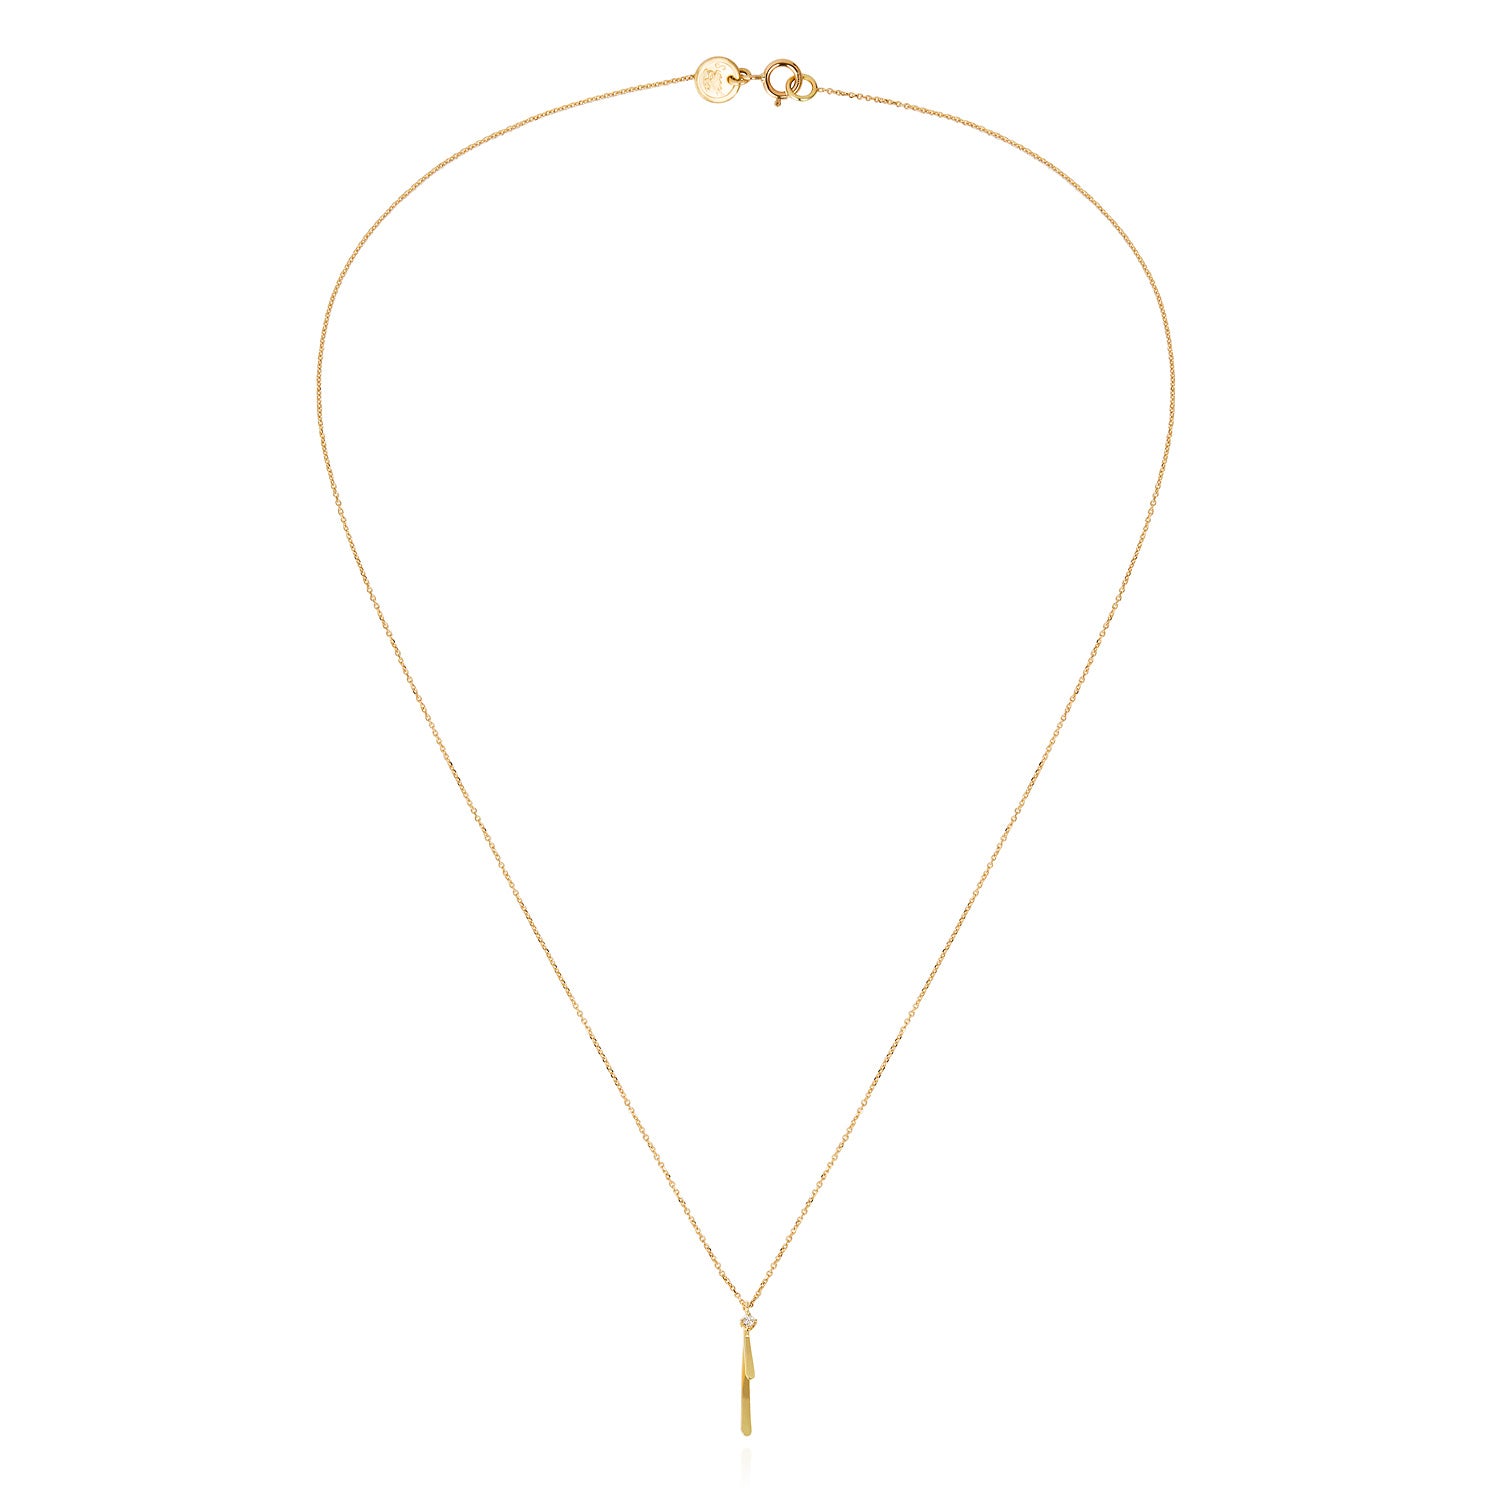 18ct gold fine chain necklace with golden bar and diamond pendant 